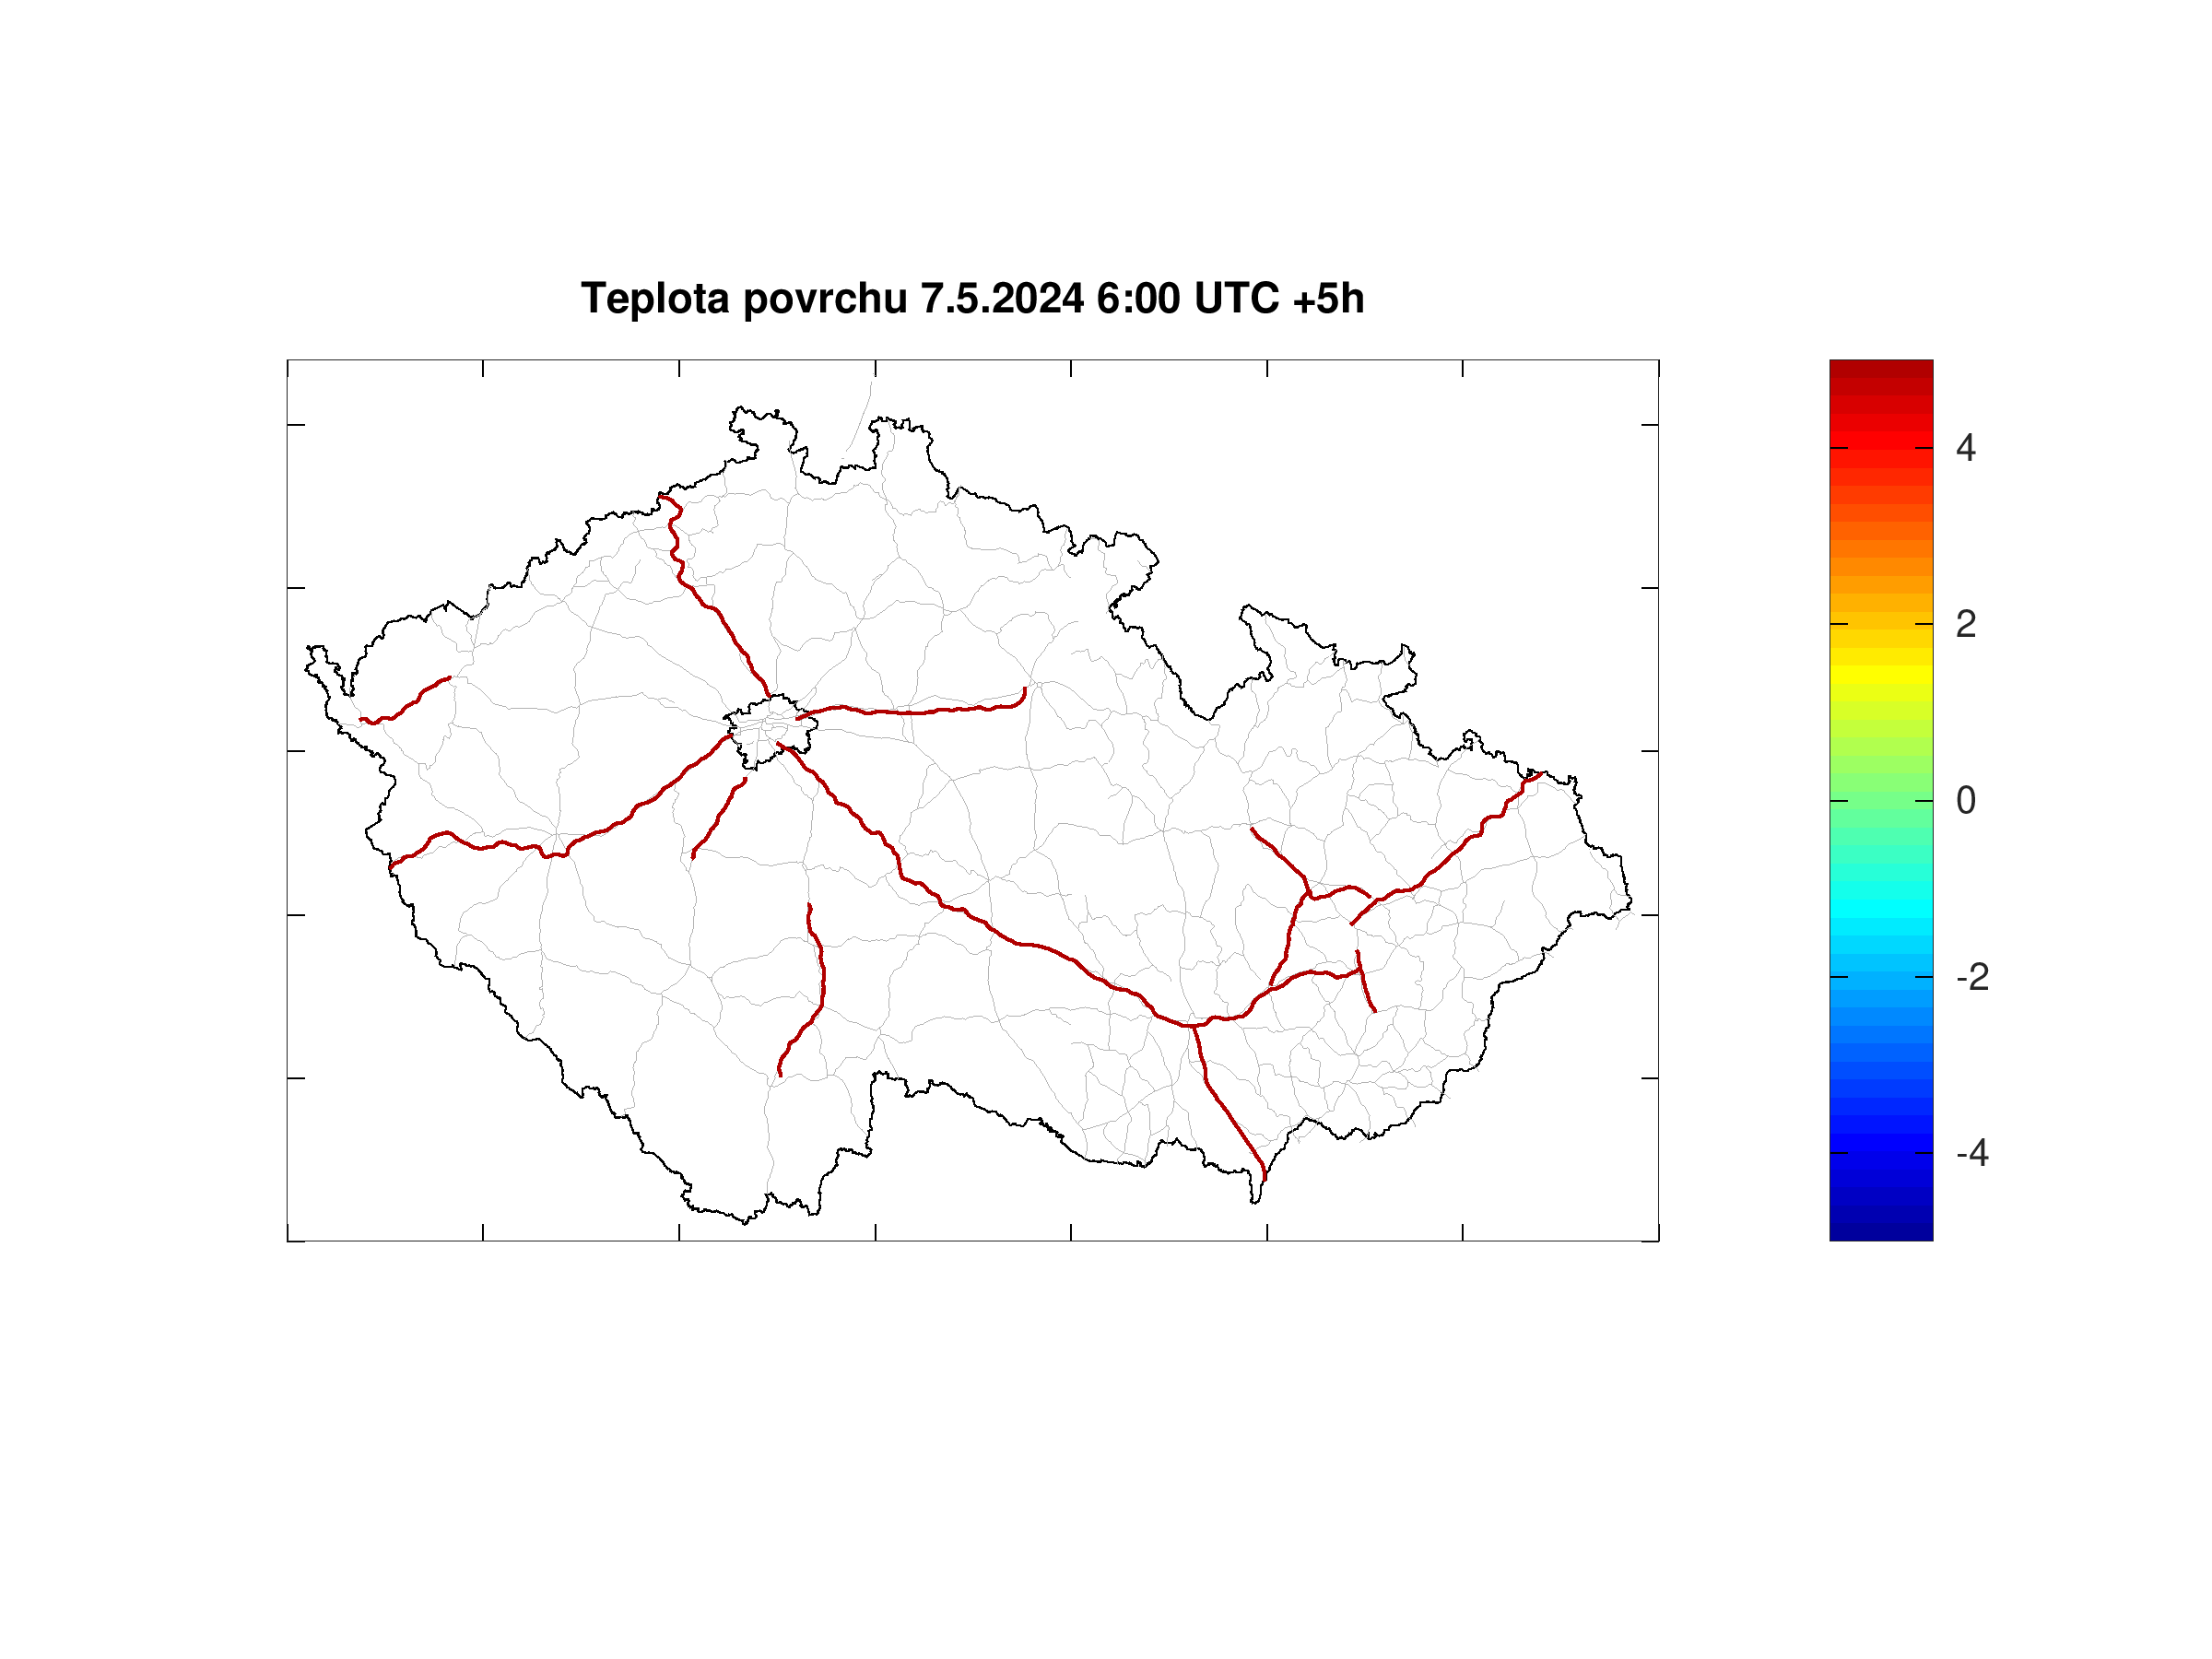 Road surface teperature forecast for Czech highways +5h